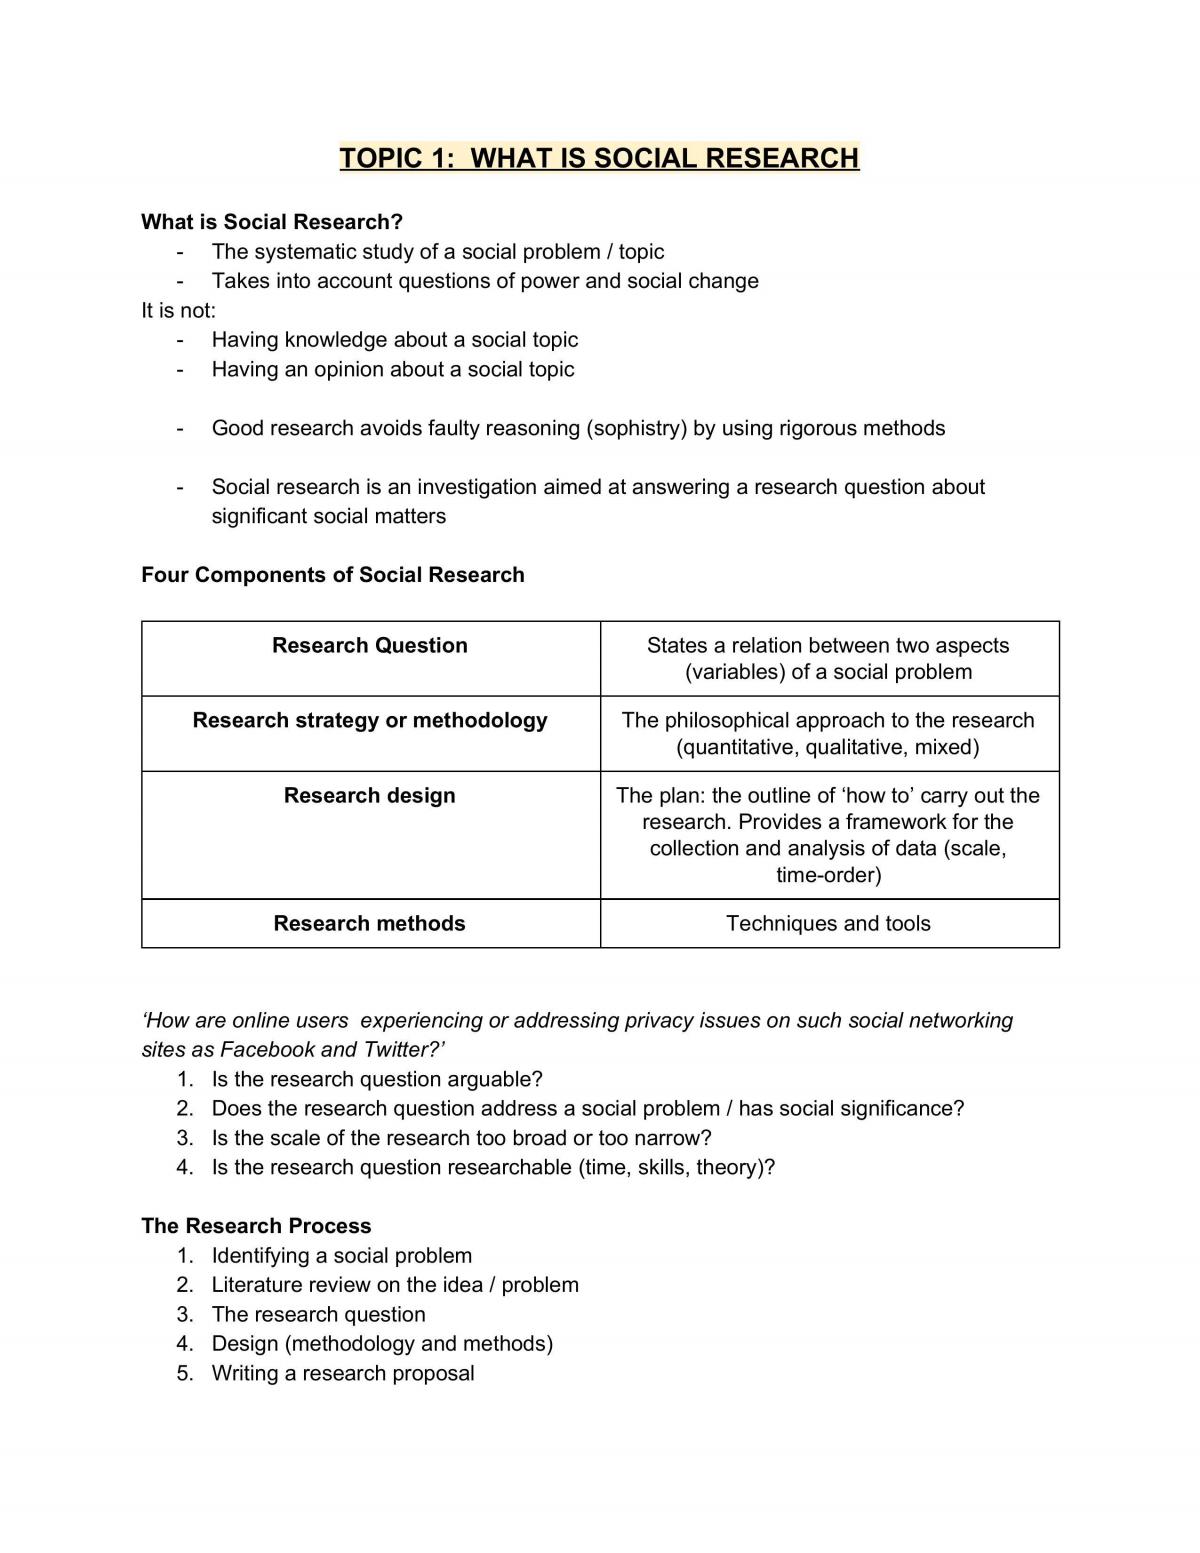 INTS206 complete notes - Page 1